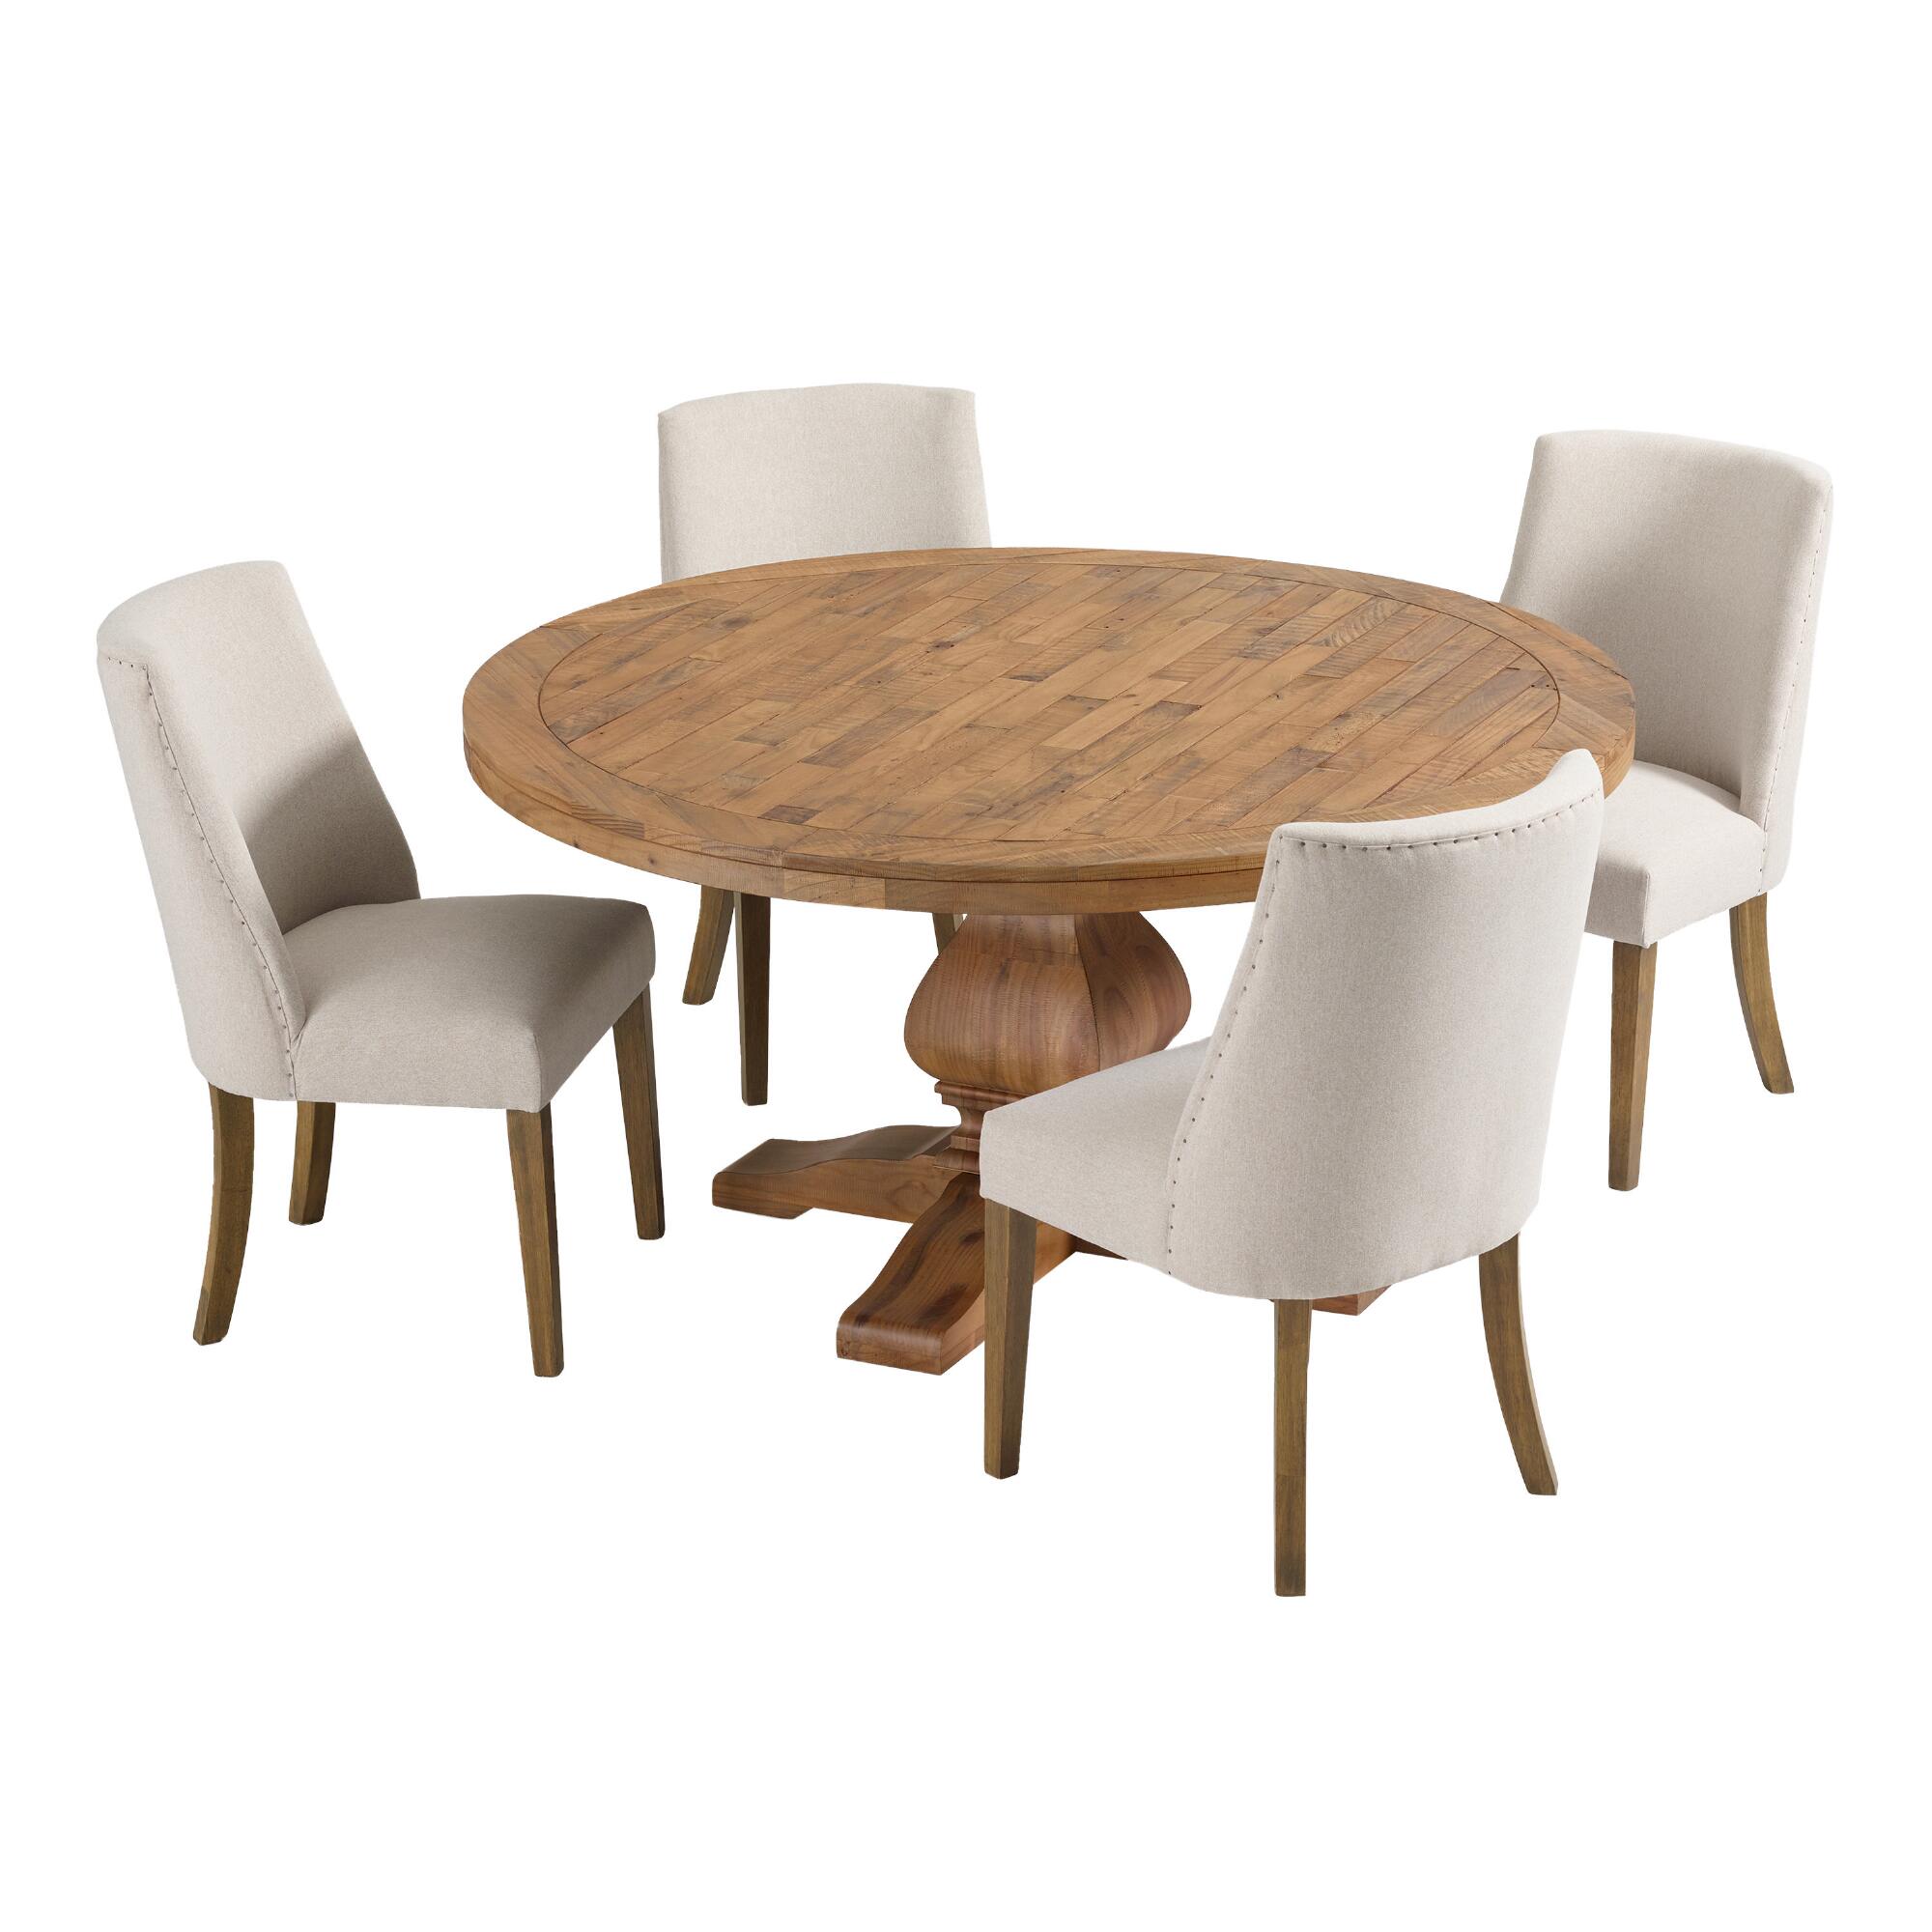 Lisette Dining Collection by World Market